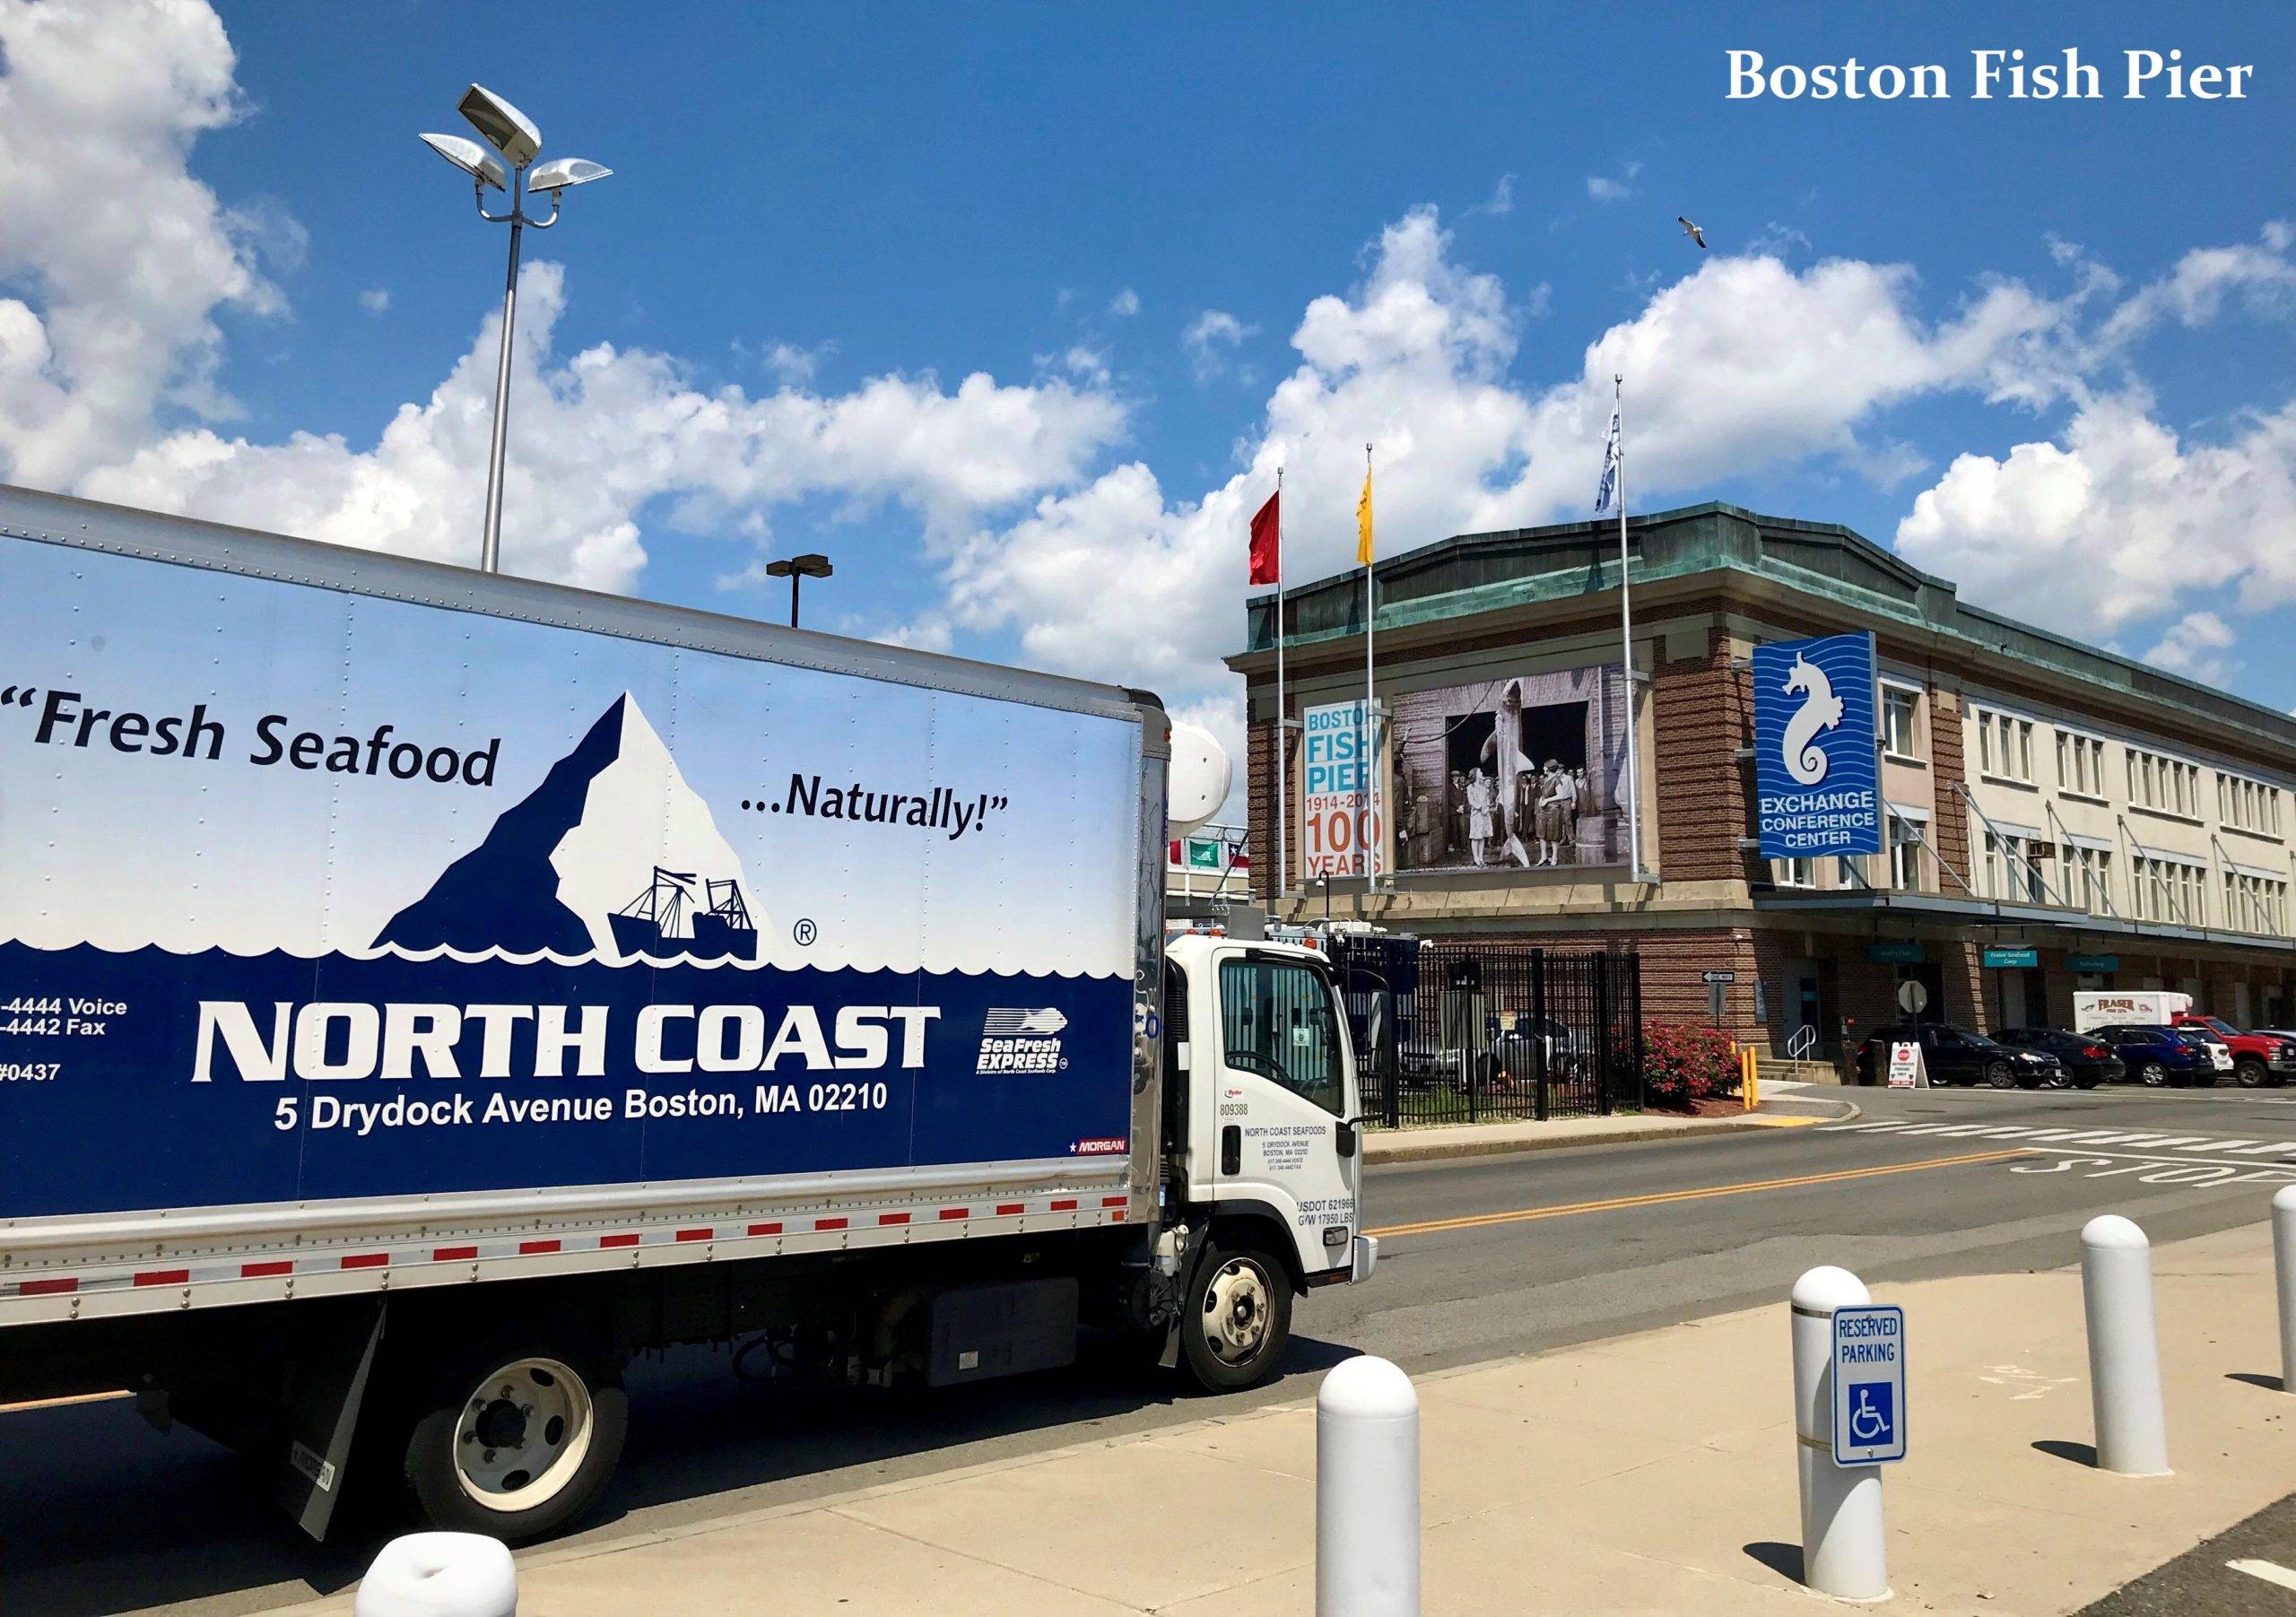 North Coast Seafood truck picking up in front of the Boston Fish Pier